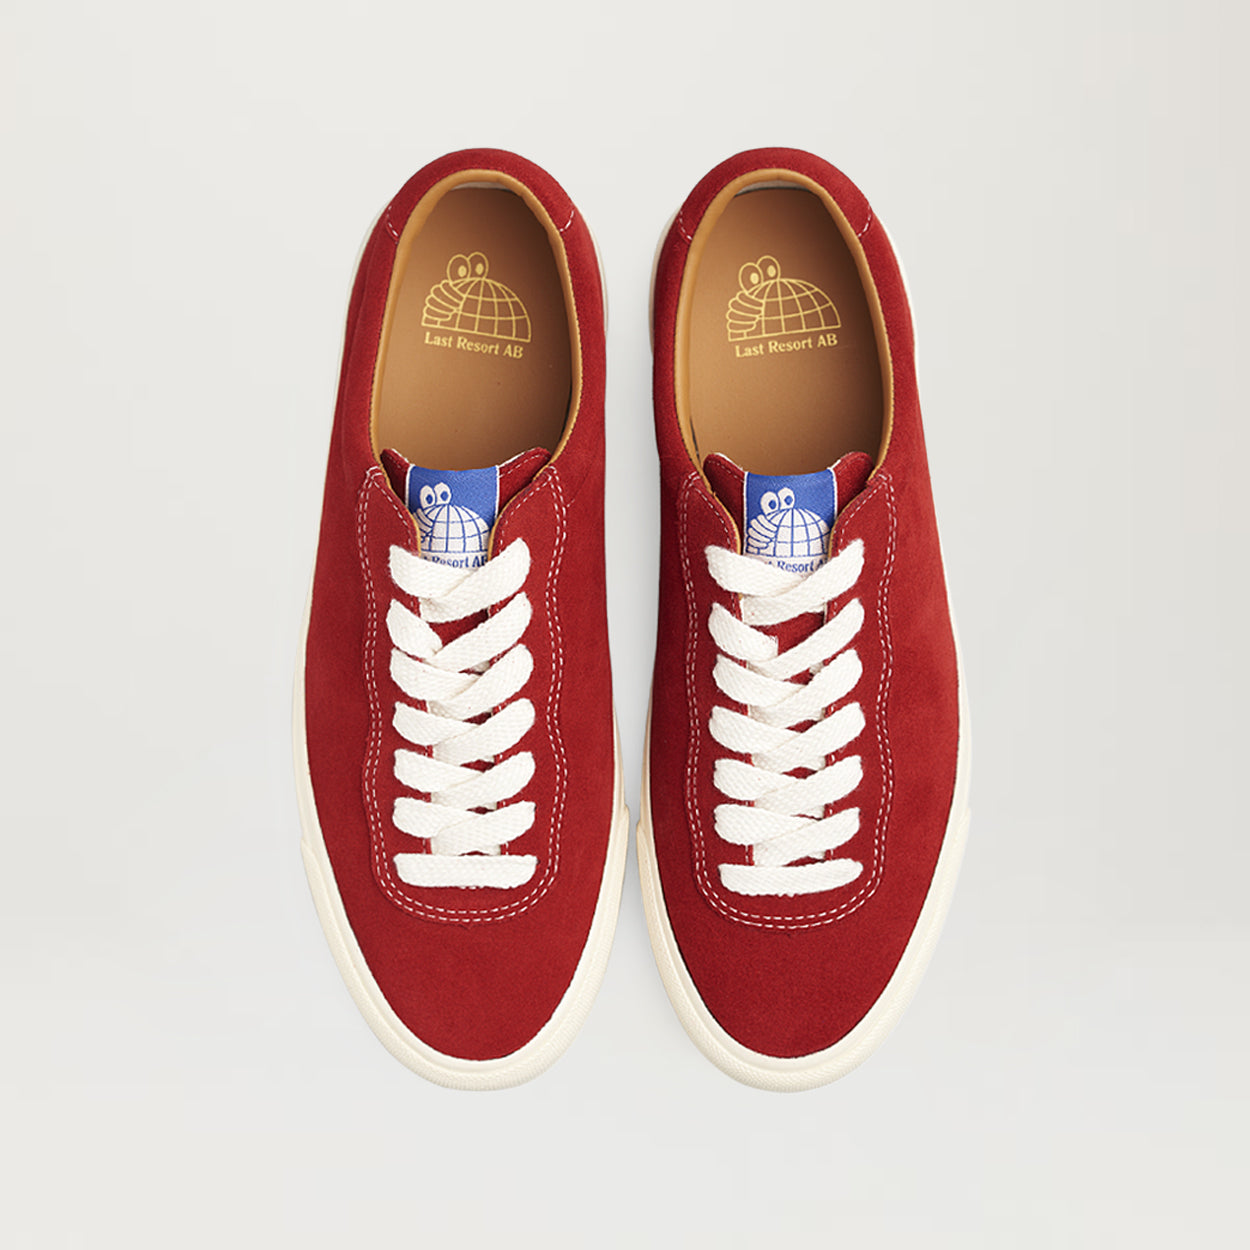 Last Resort AB VM001 Suede Lo (Old Red/White)